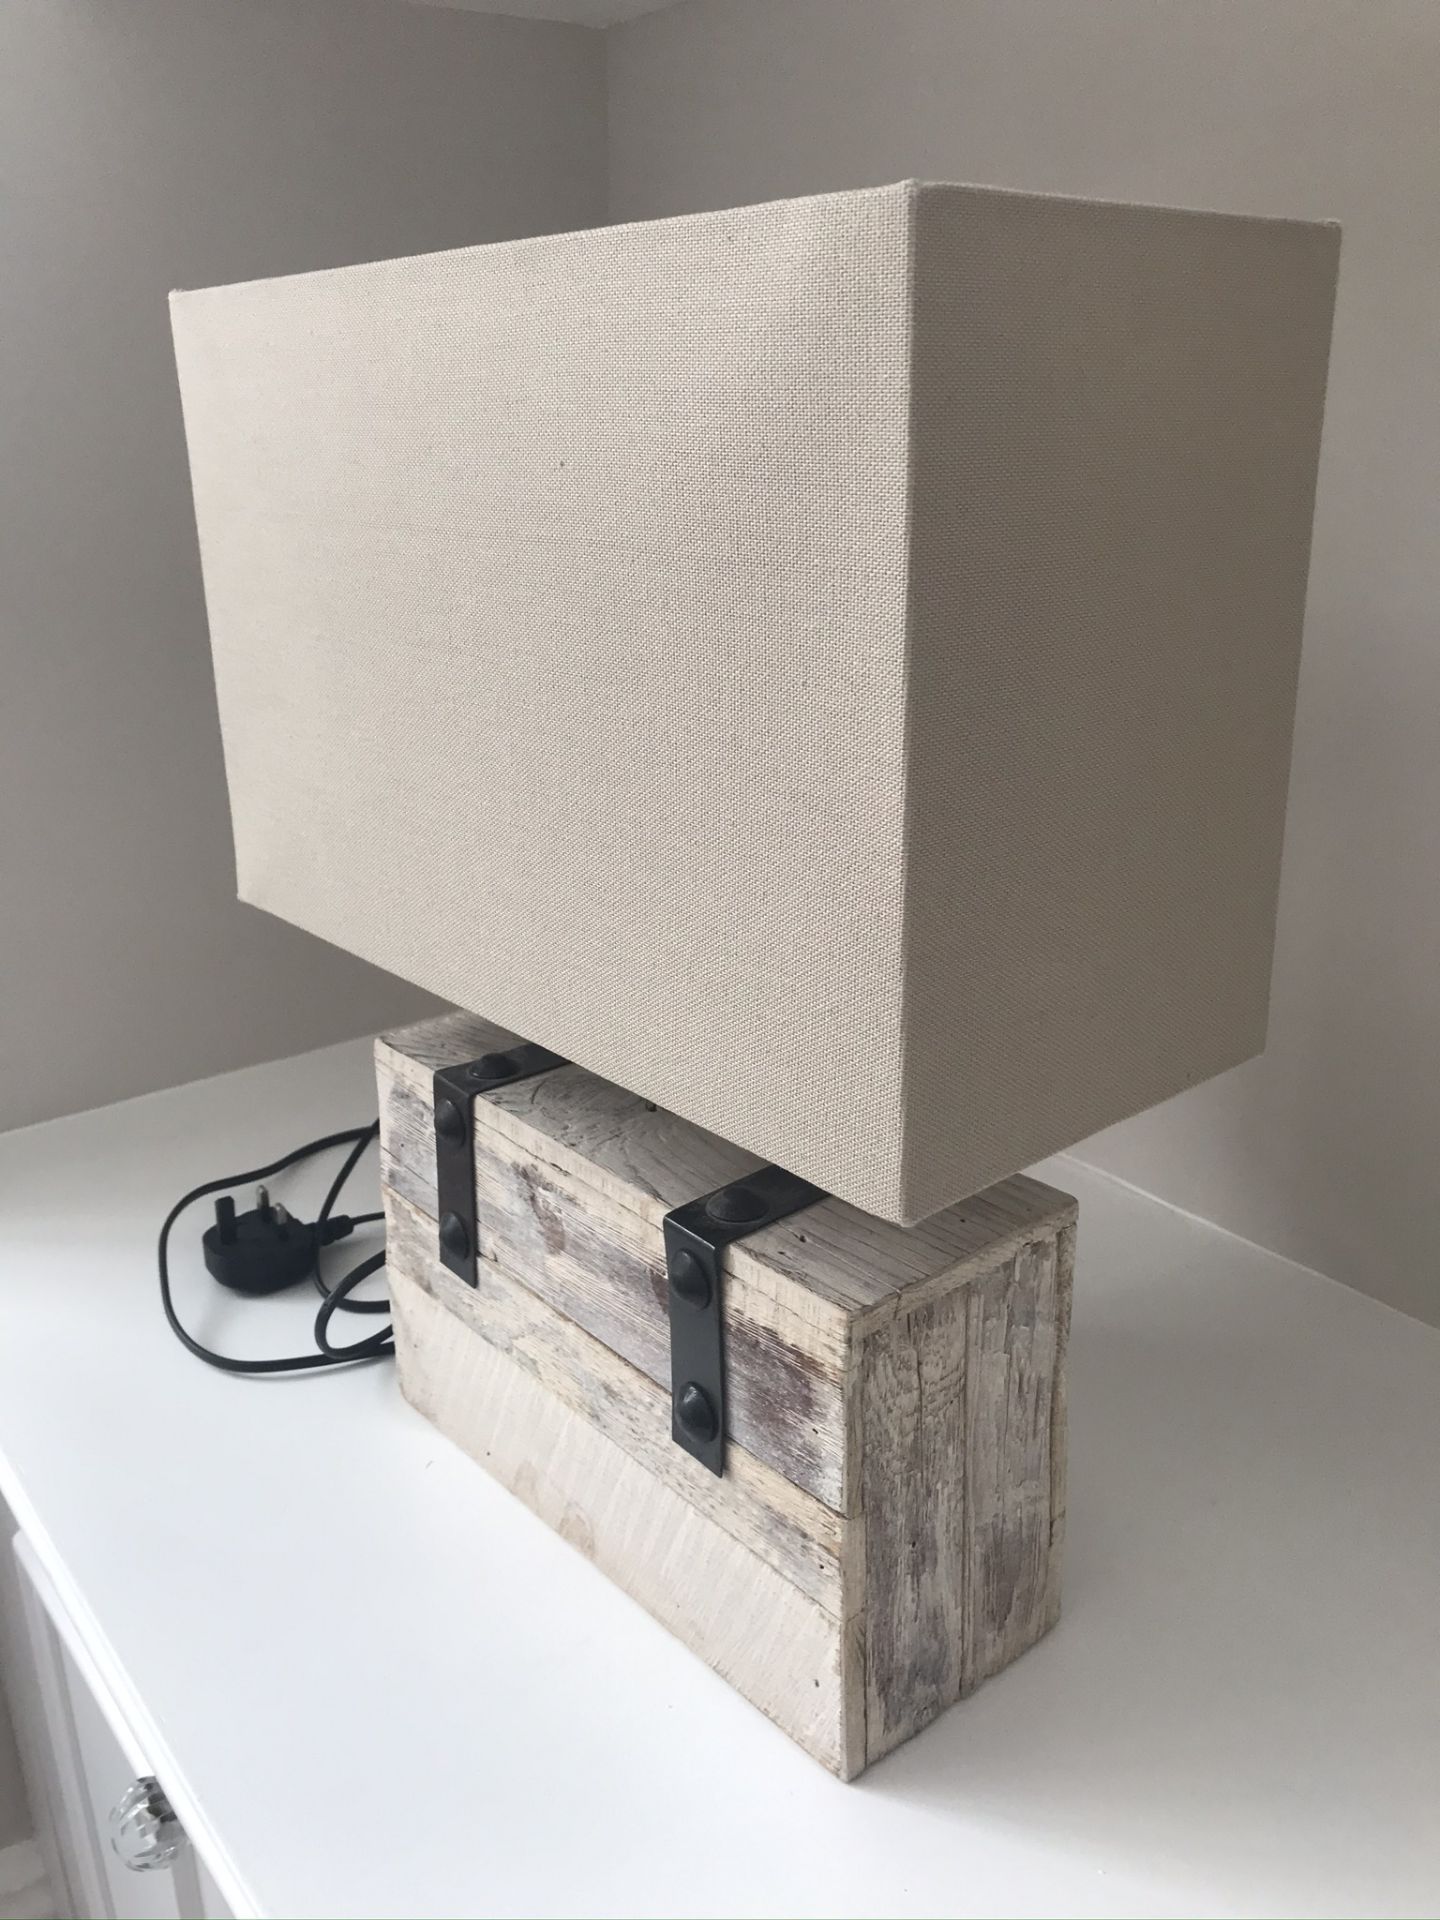 New 2 x Wooden Block Table Lamps w/ Fabric Shade - Image 5 of 6